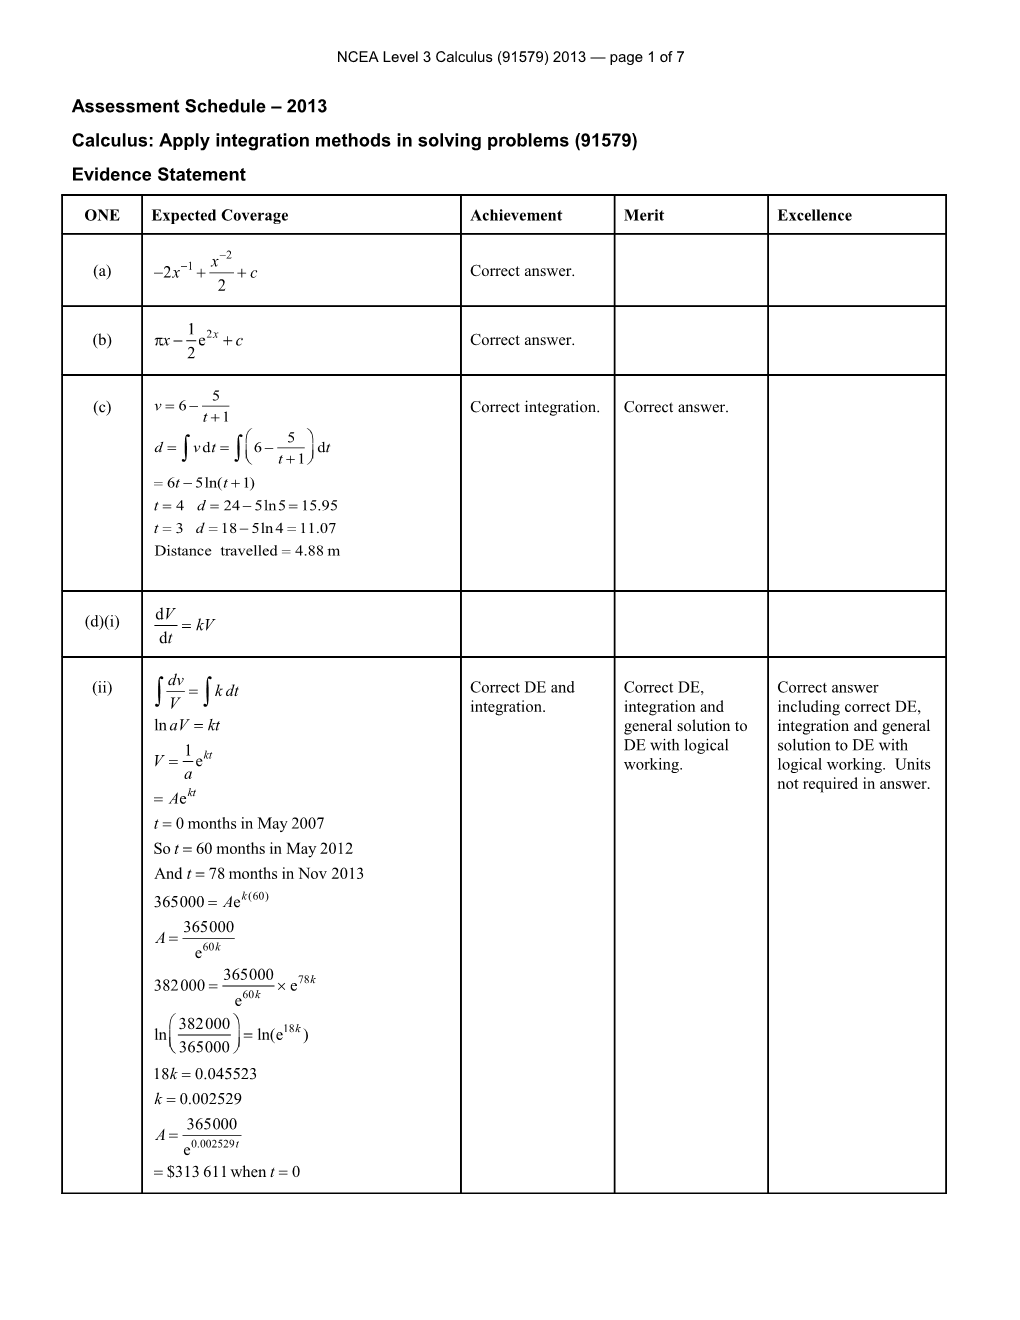 NCEA Level 3 Calculus (91579) 2013 Assessment Schedule